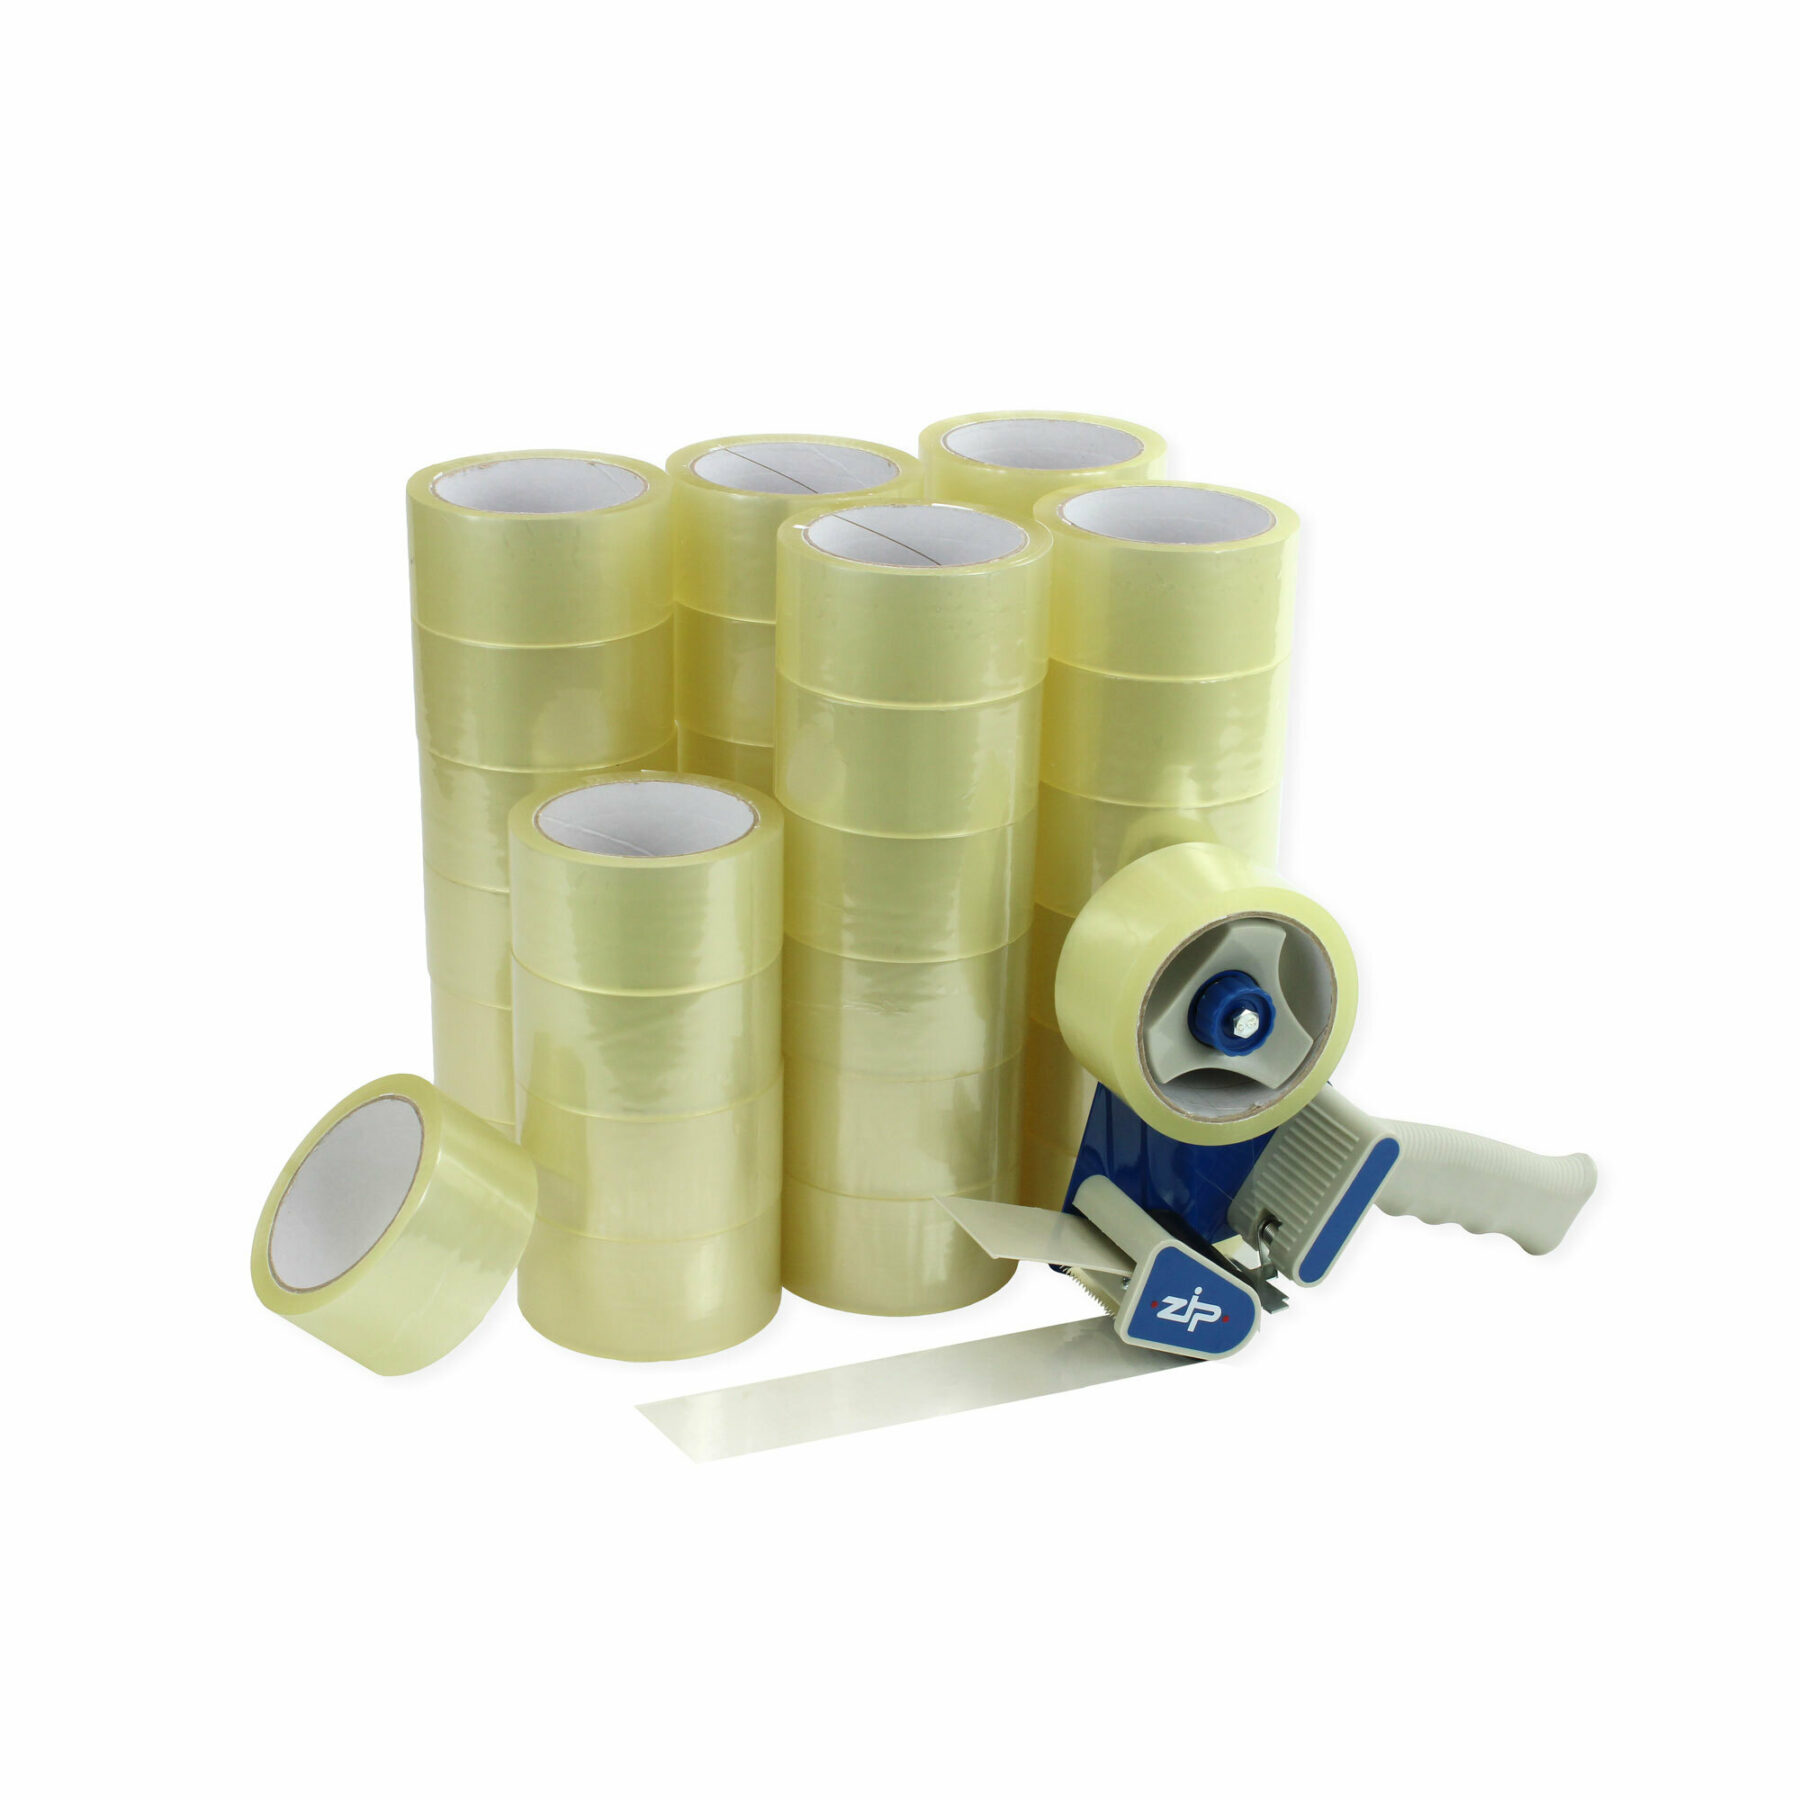 KT252 Clear Tape (36pcs) with Tape Gun